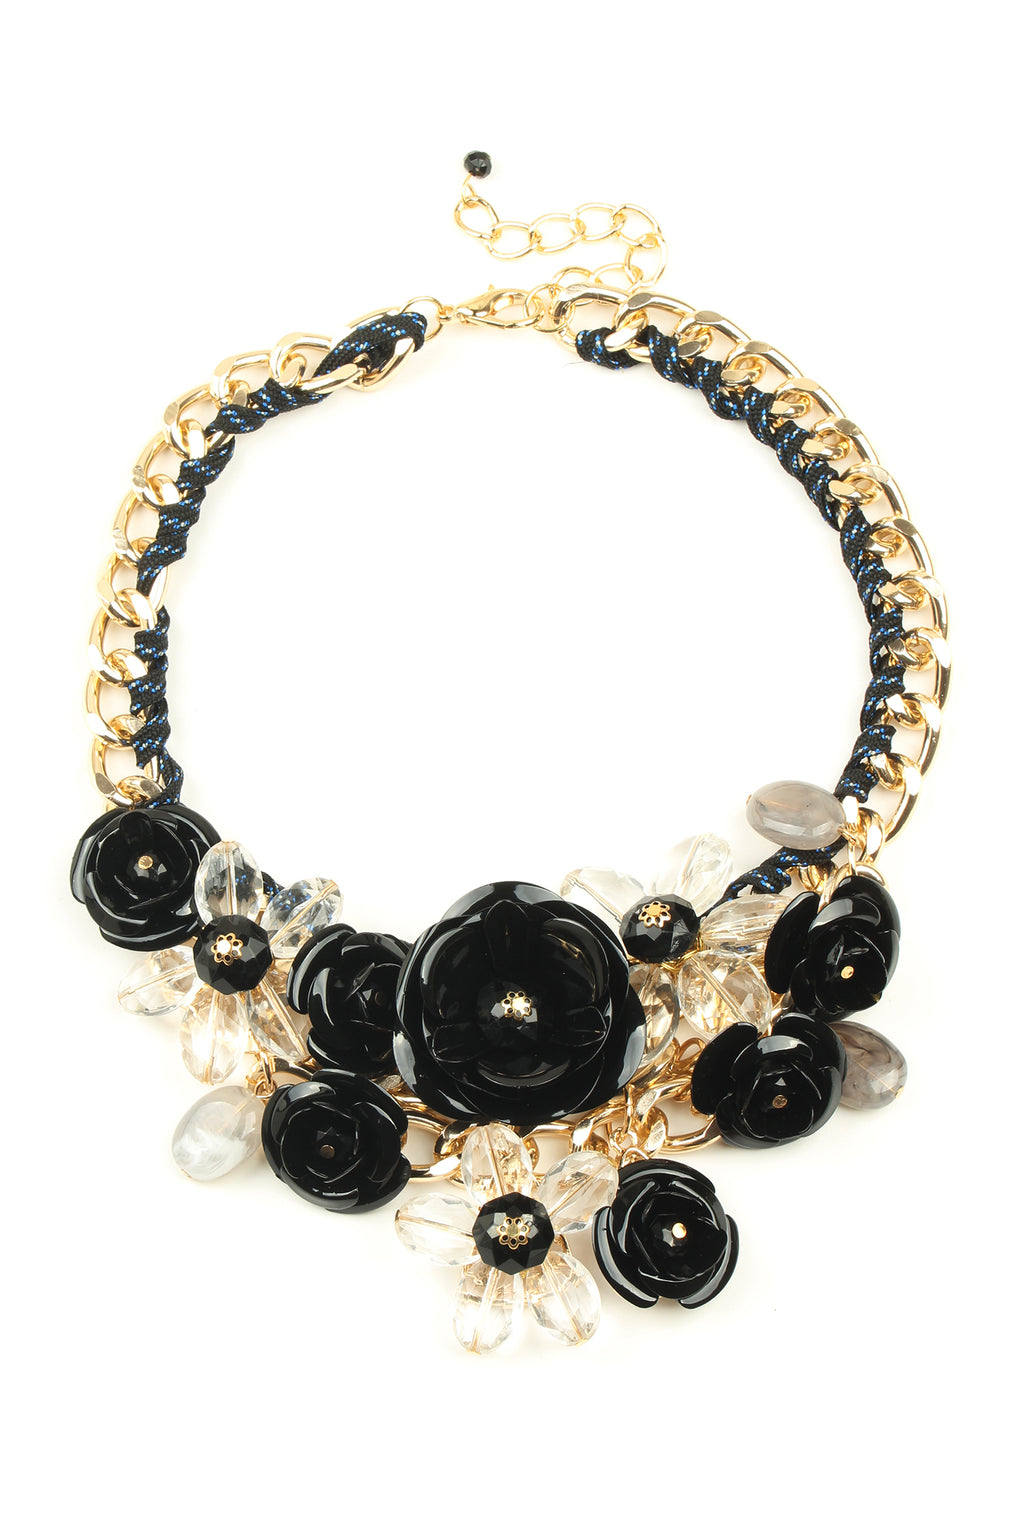 12 Inch gold statement necklace with chunky chain and array of black and gold metal flowers.